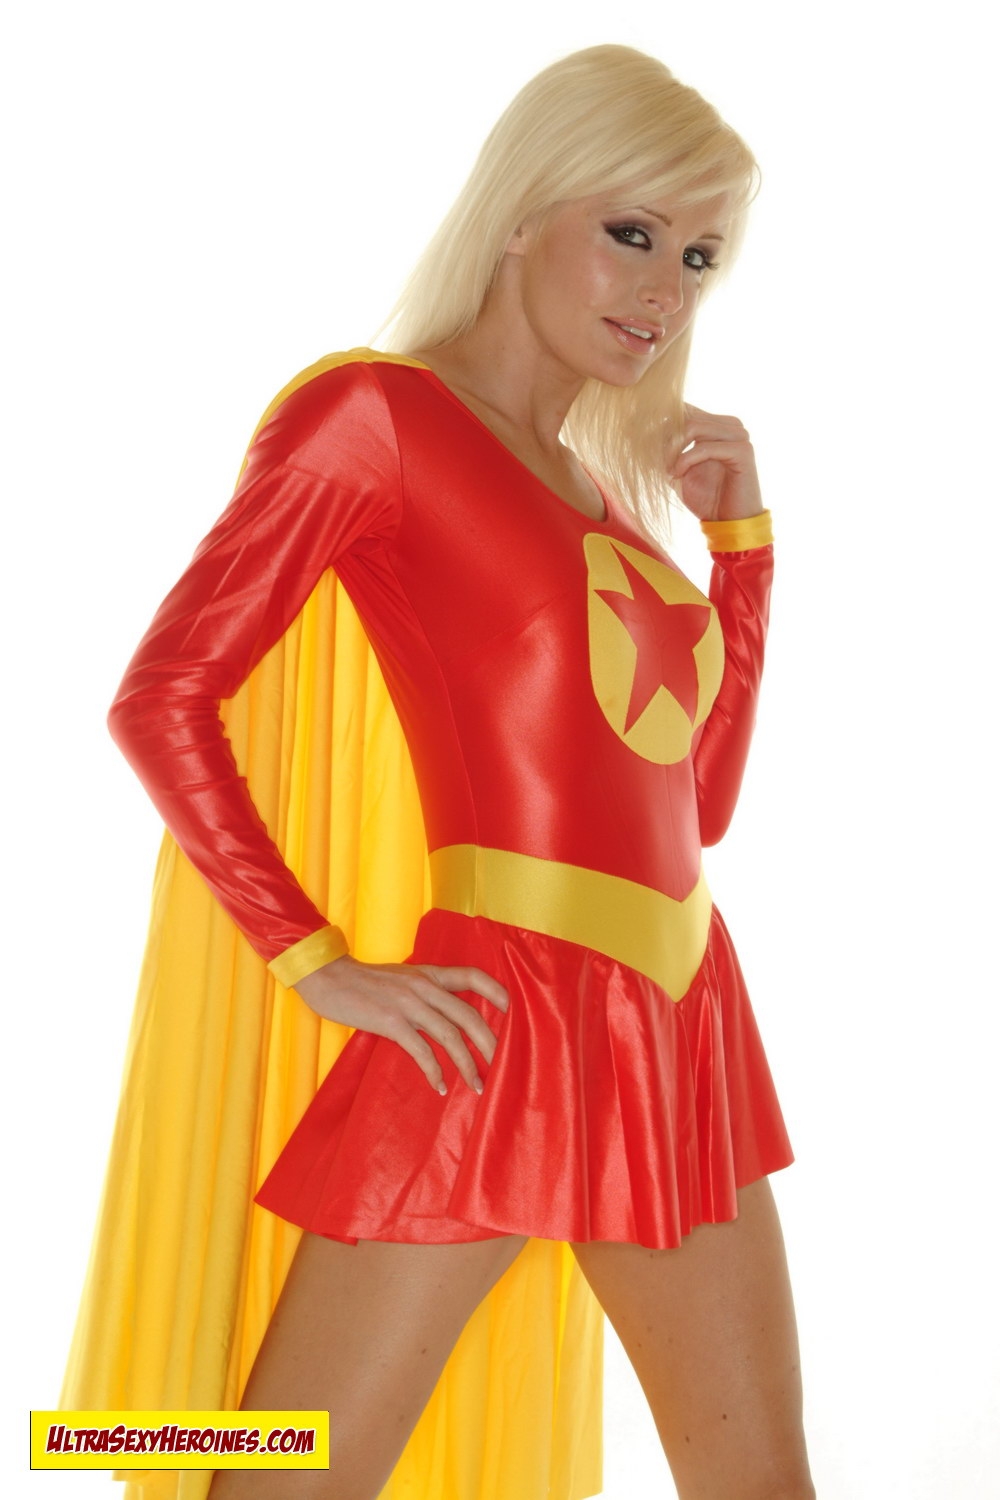 [UltraSexyHeroines] Sexy Blonde Super Heroine Cosplay Nude 149